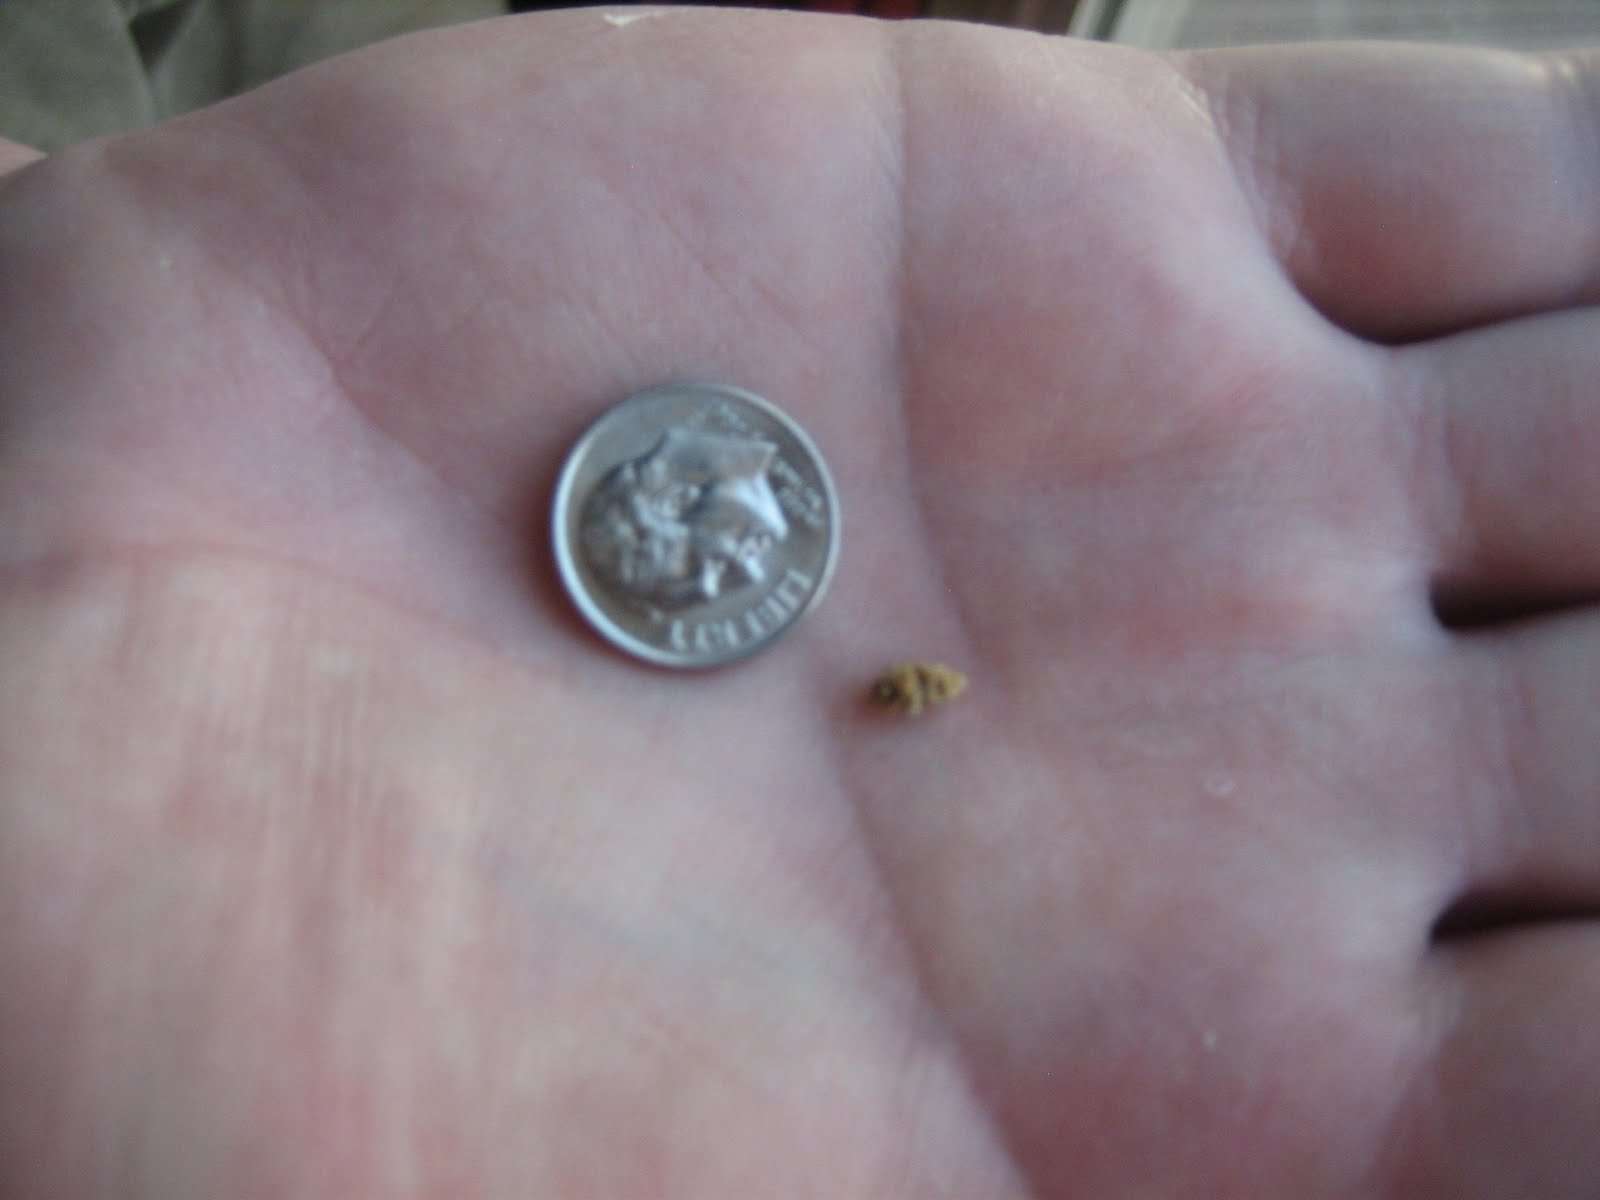 6mm Kidney Stone Actual Size